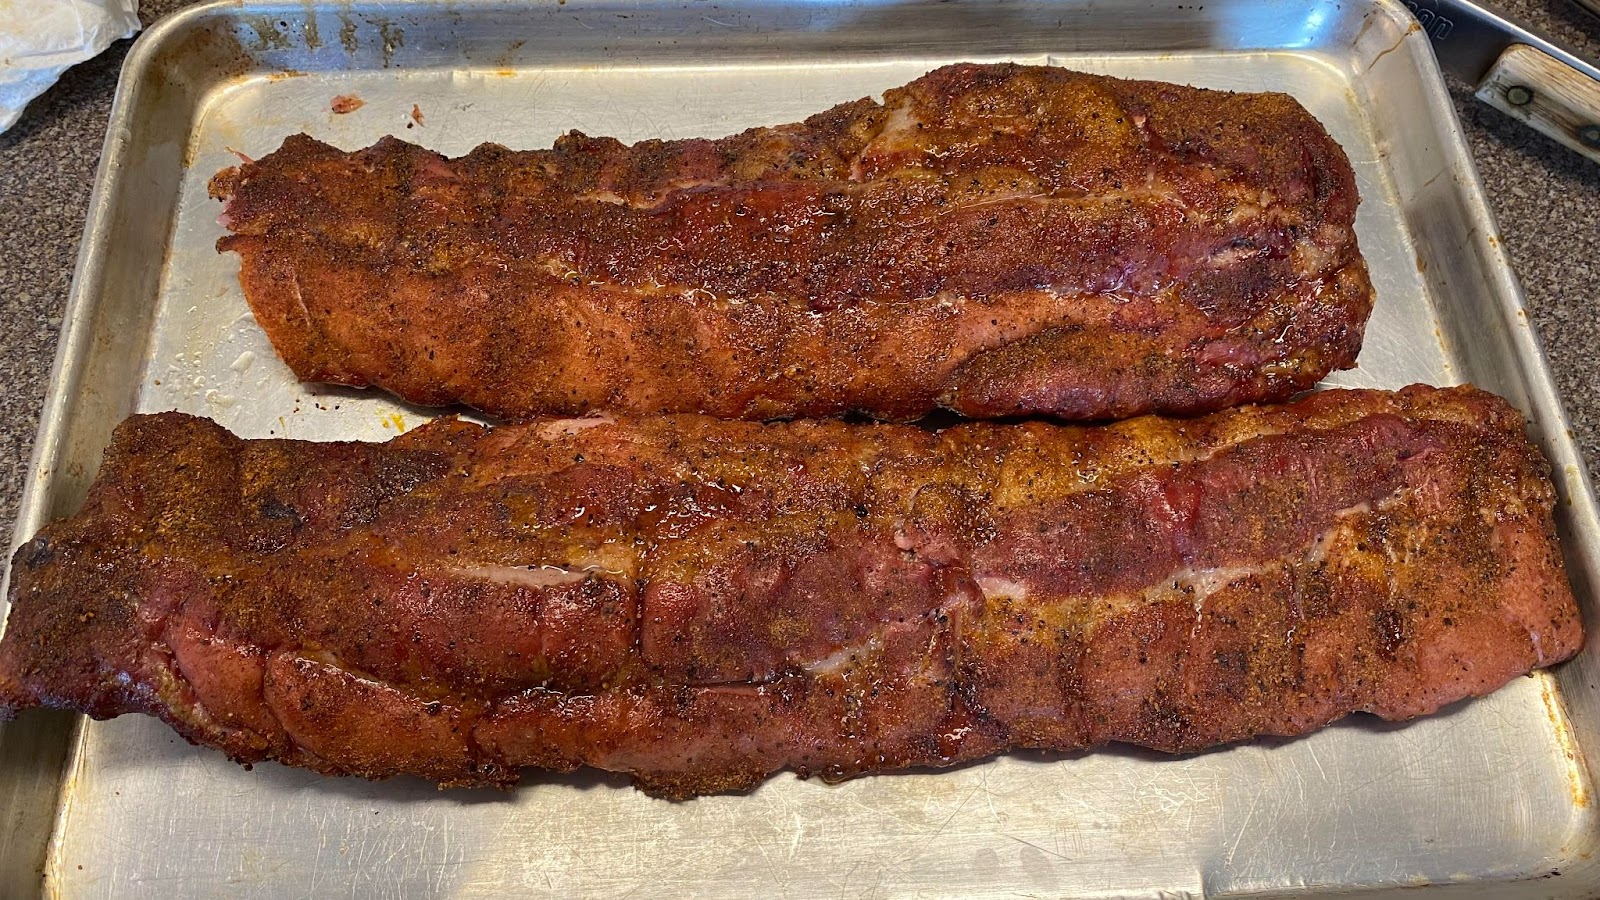 Two racks of ribs pulled off the grill and on a cookie sheet